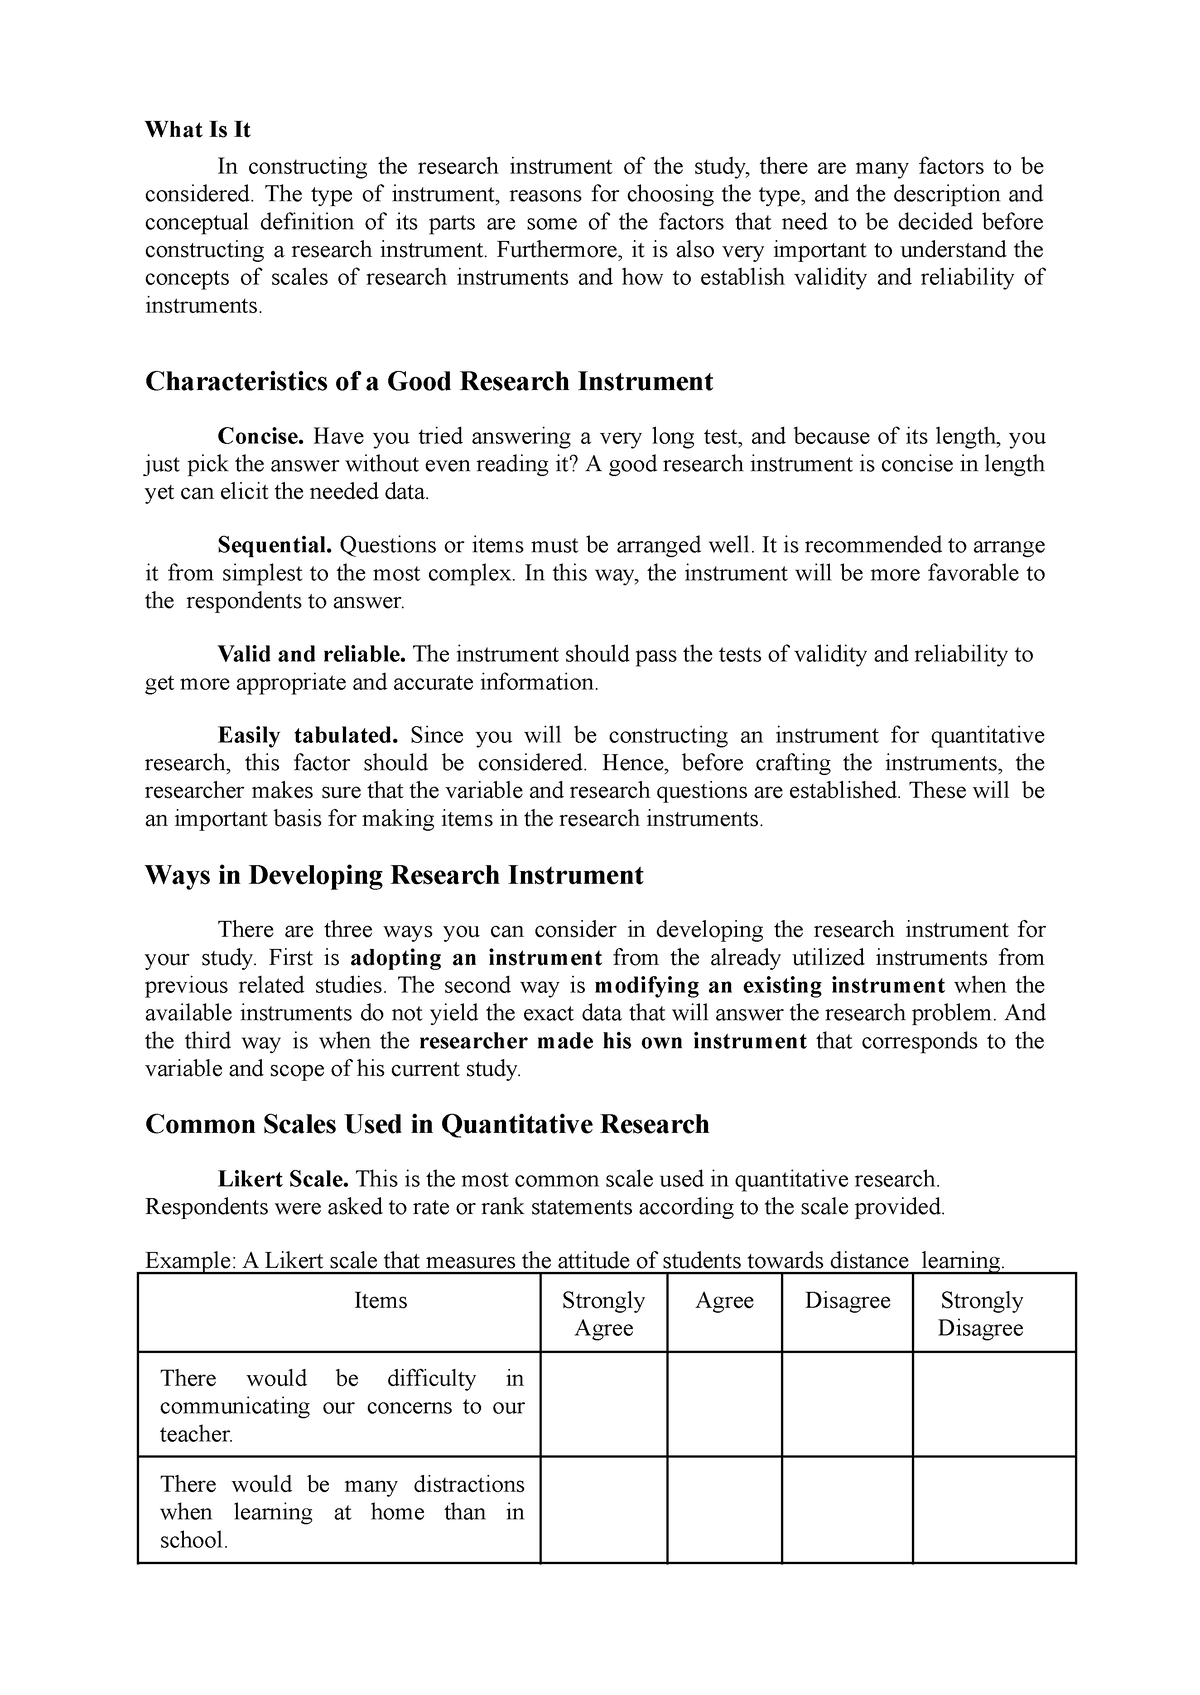 what to include in research instrument